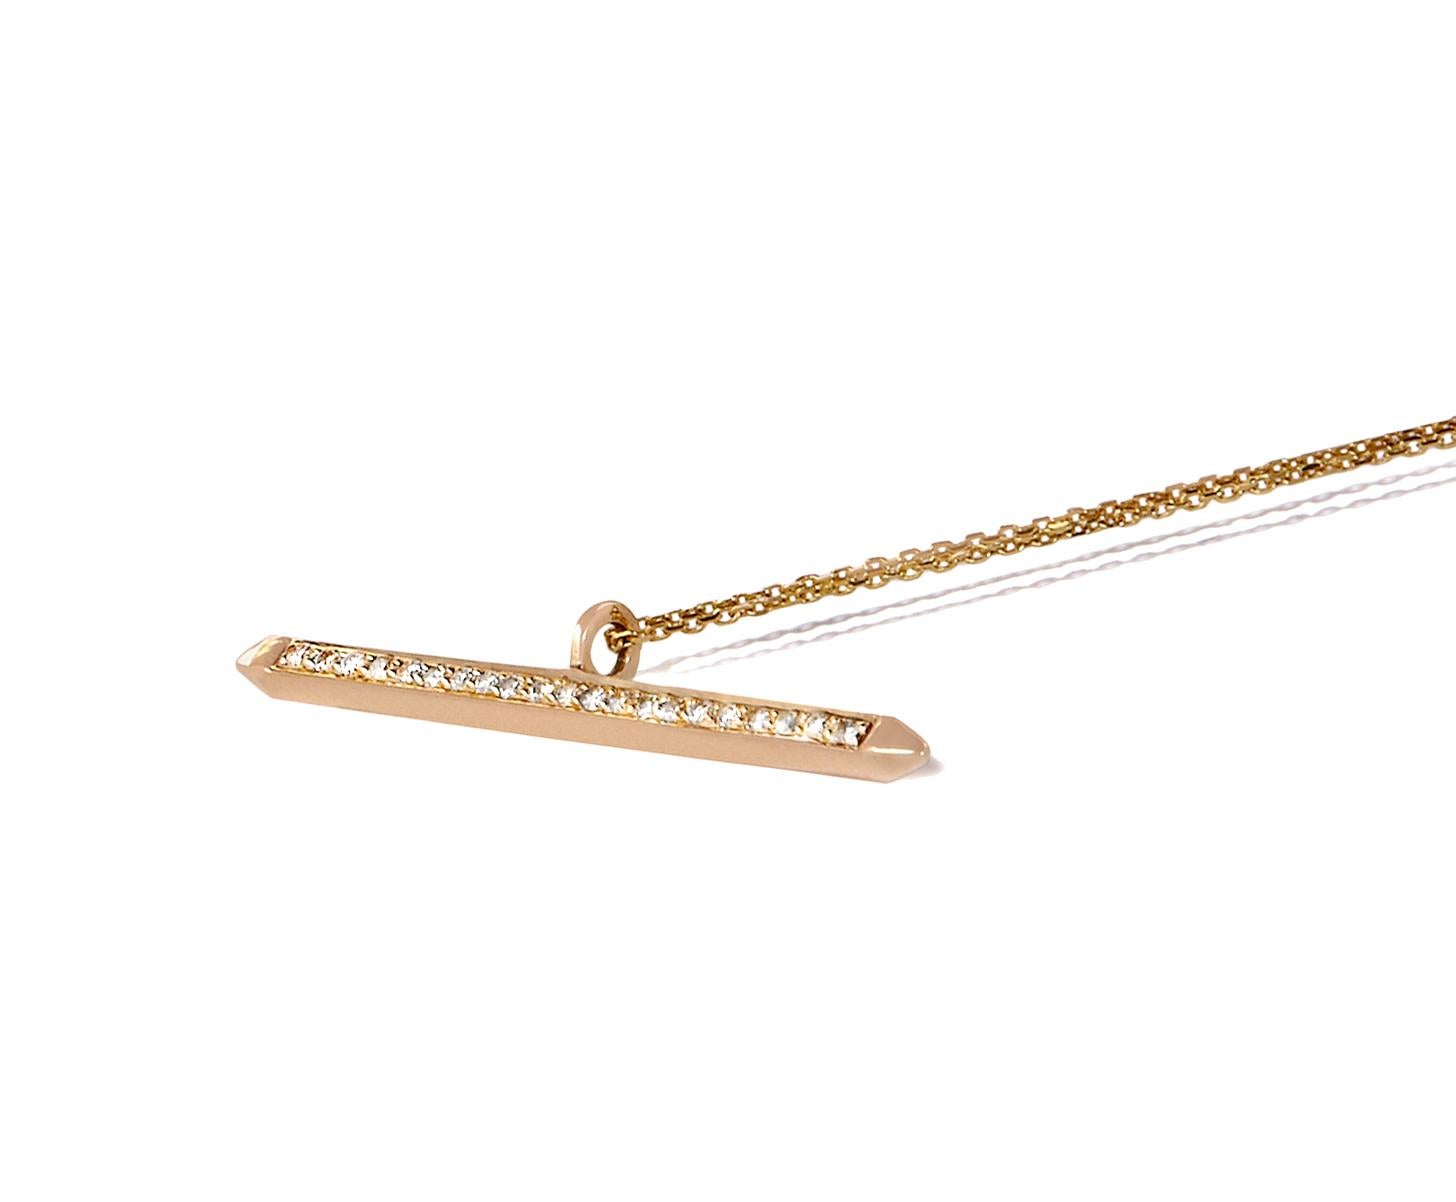 This spear-shaped solid gold pendant is crafted in 9-carat yellow gold accented with 21 white diamonds and strung on a fine 16-inch gold chain. The total diamond carat weight is 0.17 carats of H/VS1 quality diamonds and the pendant is 2mm in width